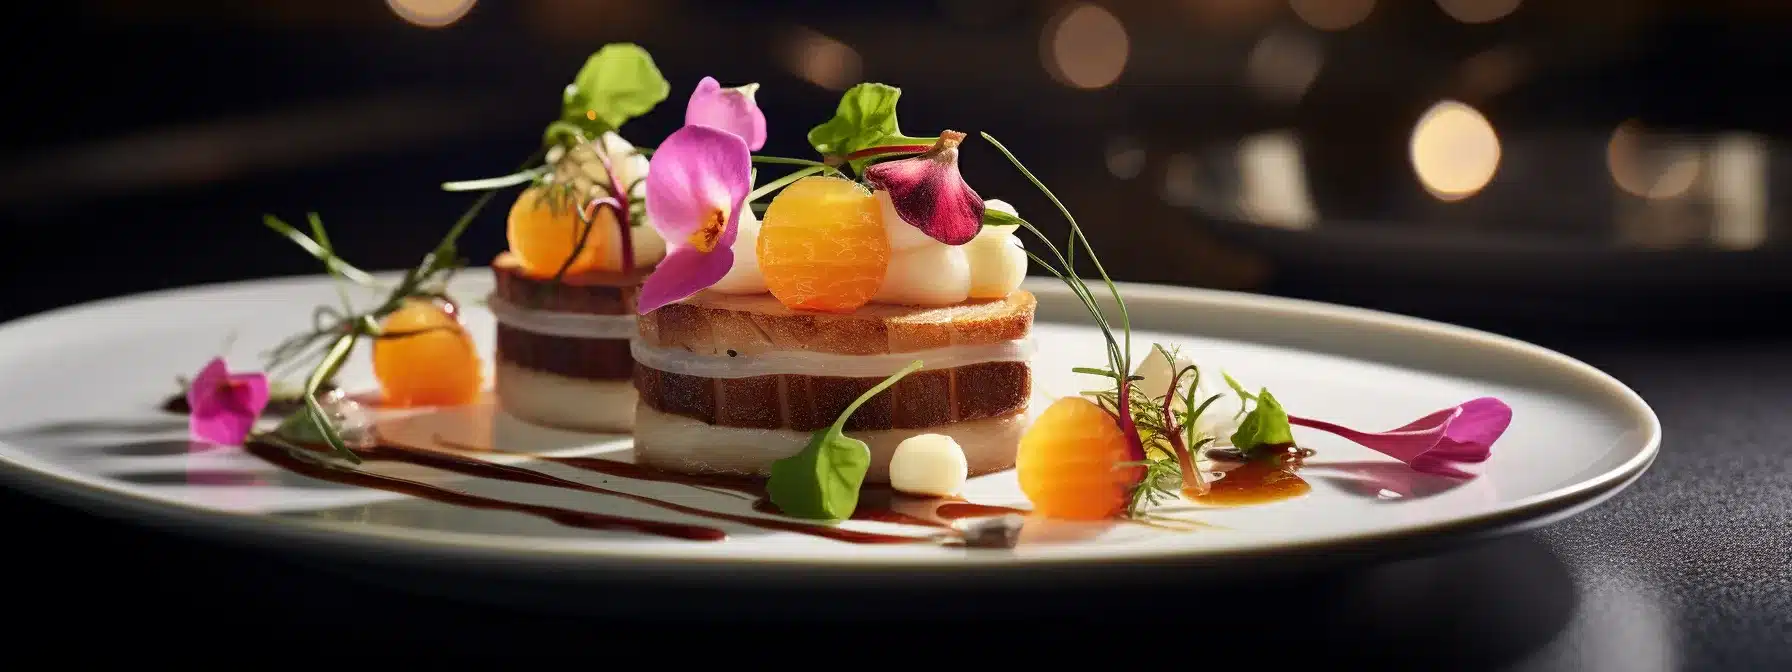 A Beautifully Plated Dish With Various Ingredients And Garnishes Arranged Elegantly.